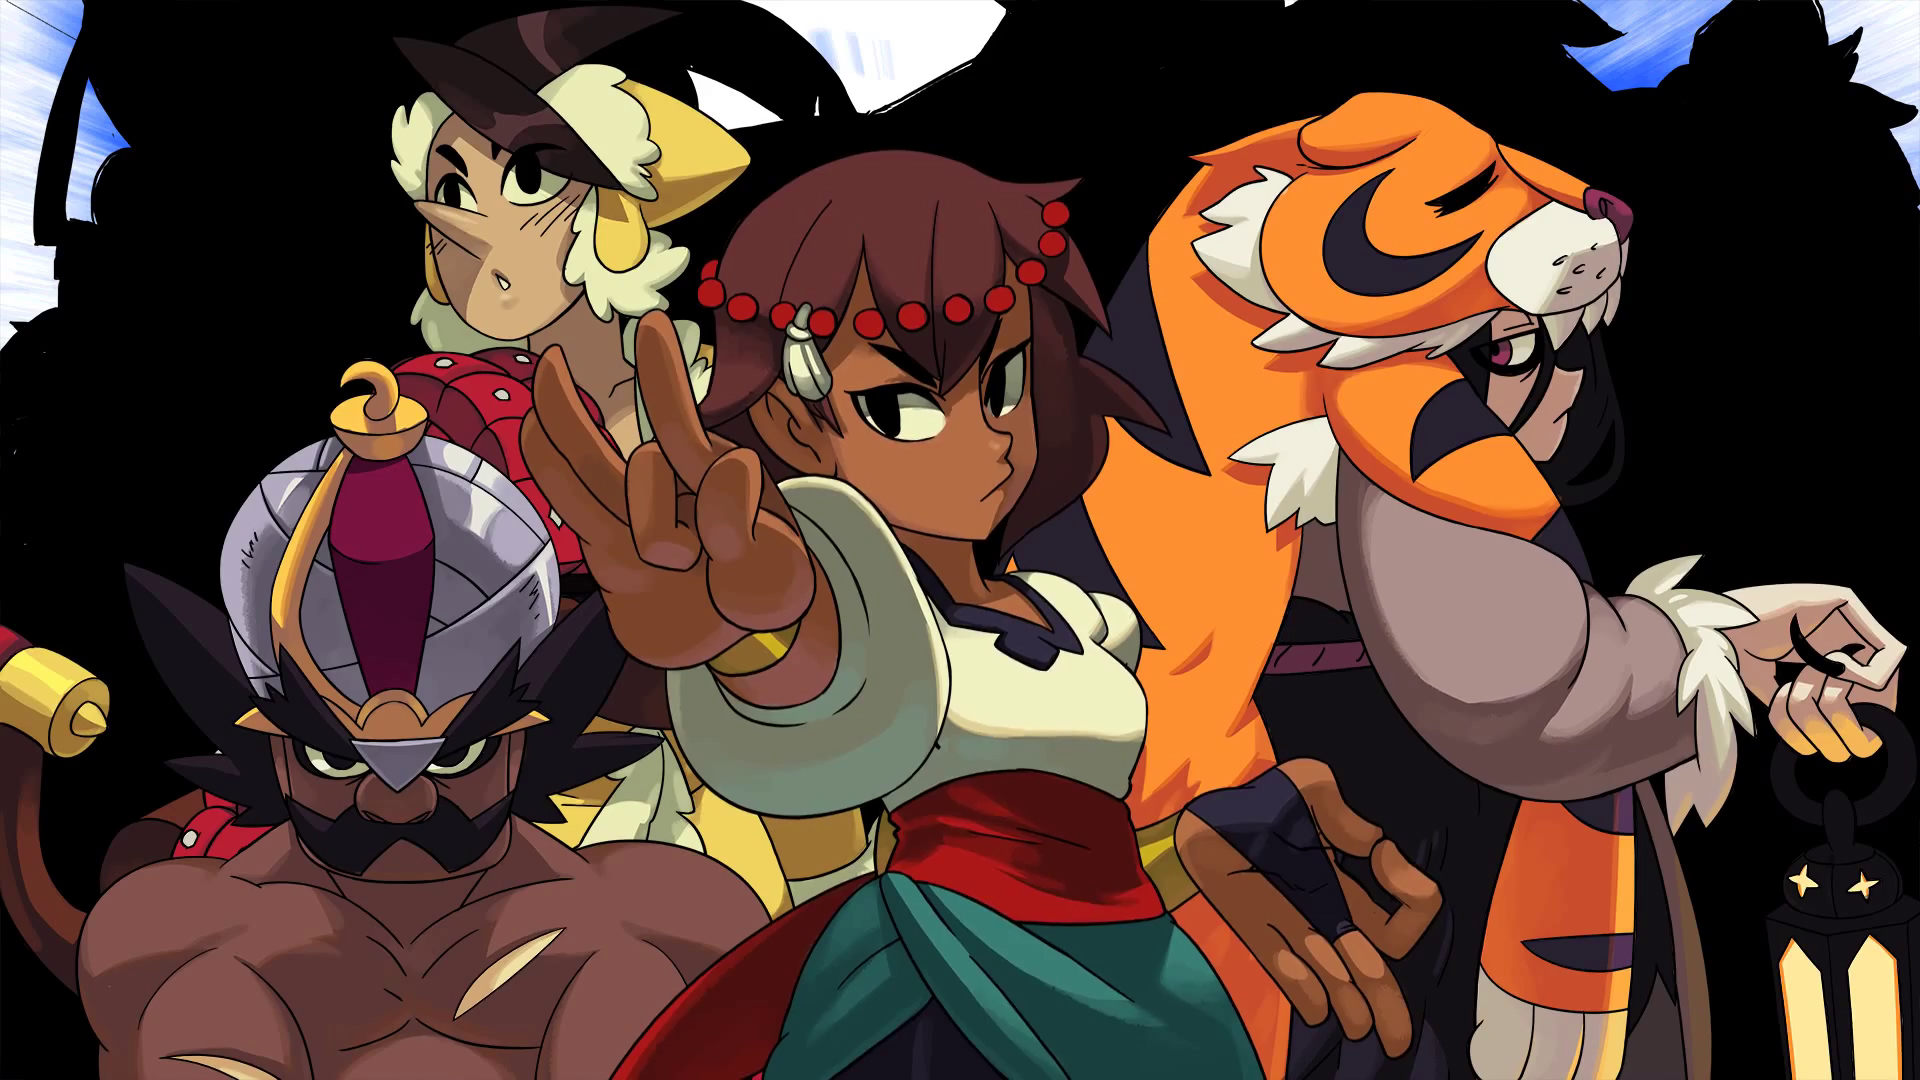 Lab Zero Games’ Pretty Action RPG Indivisible is Now on Indiegogo